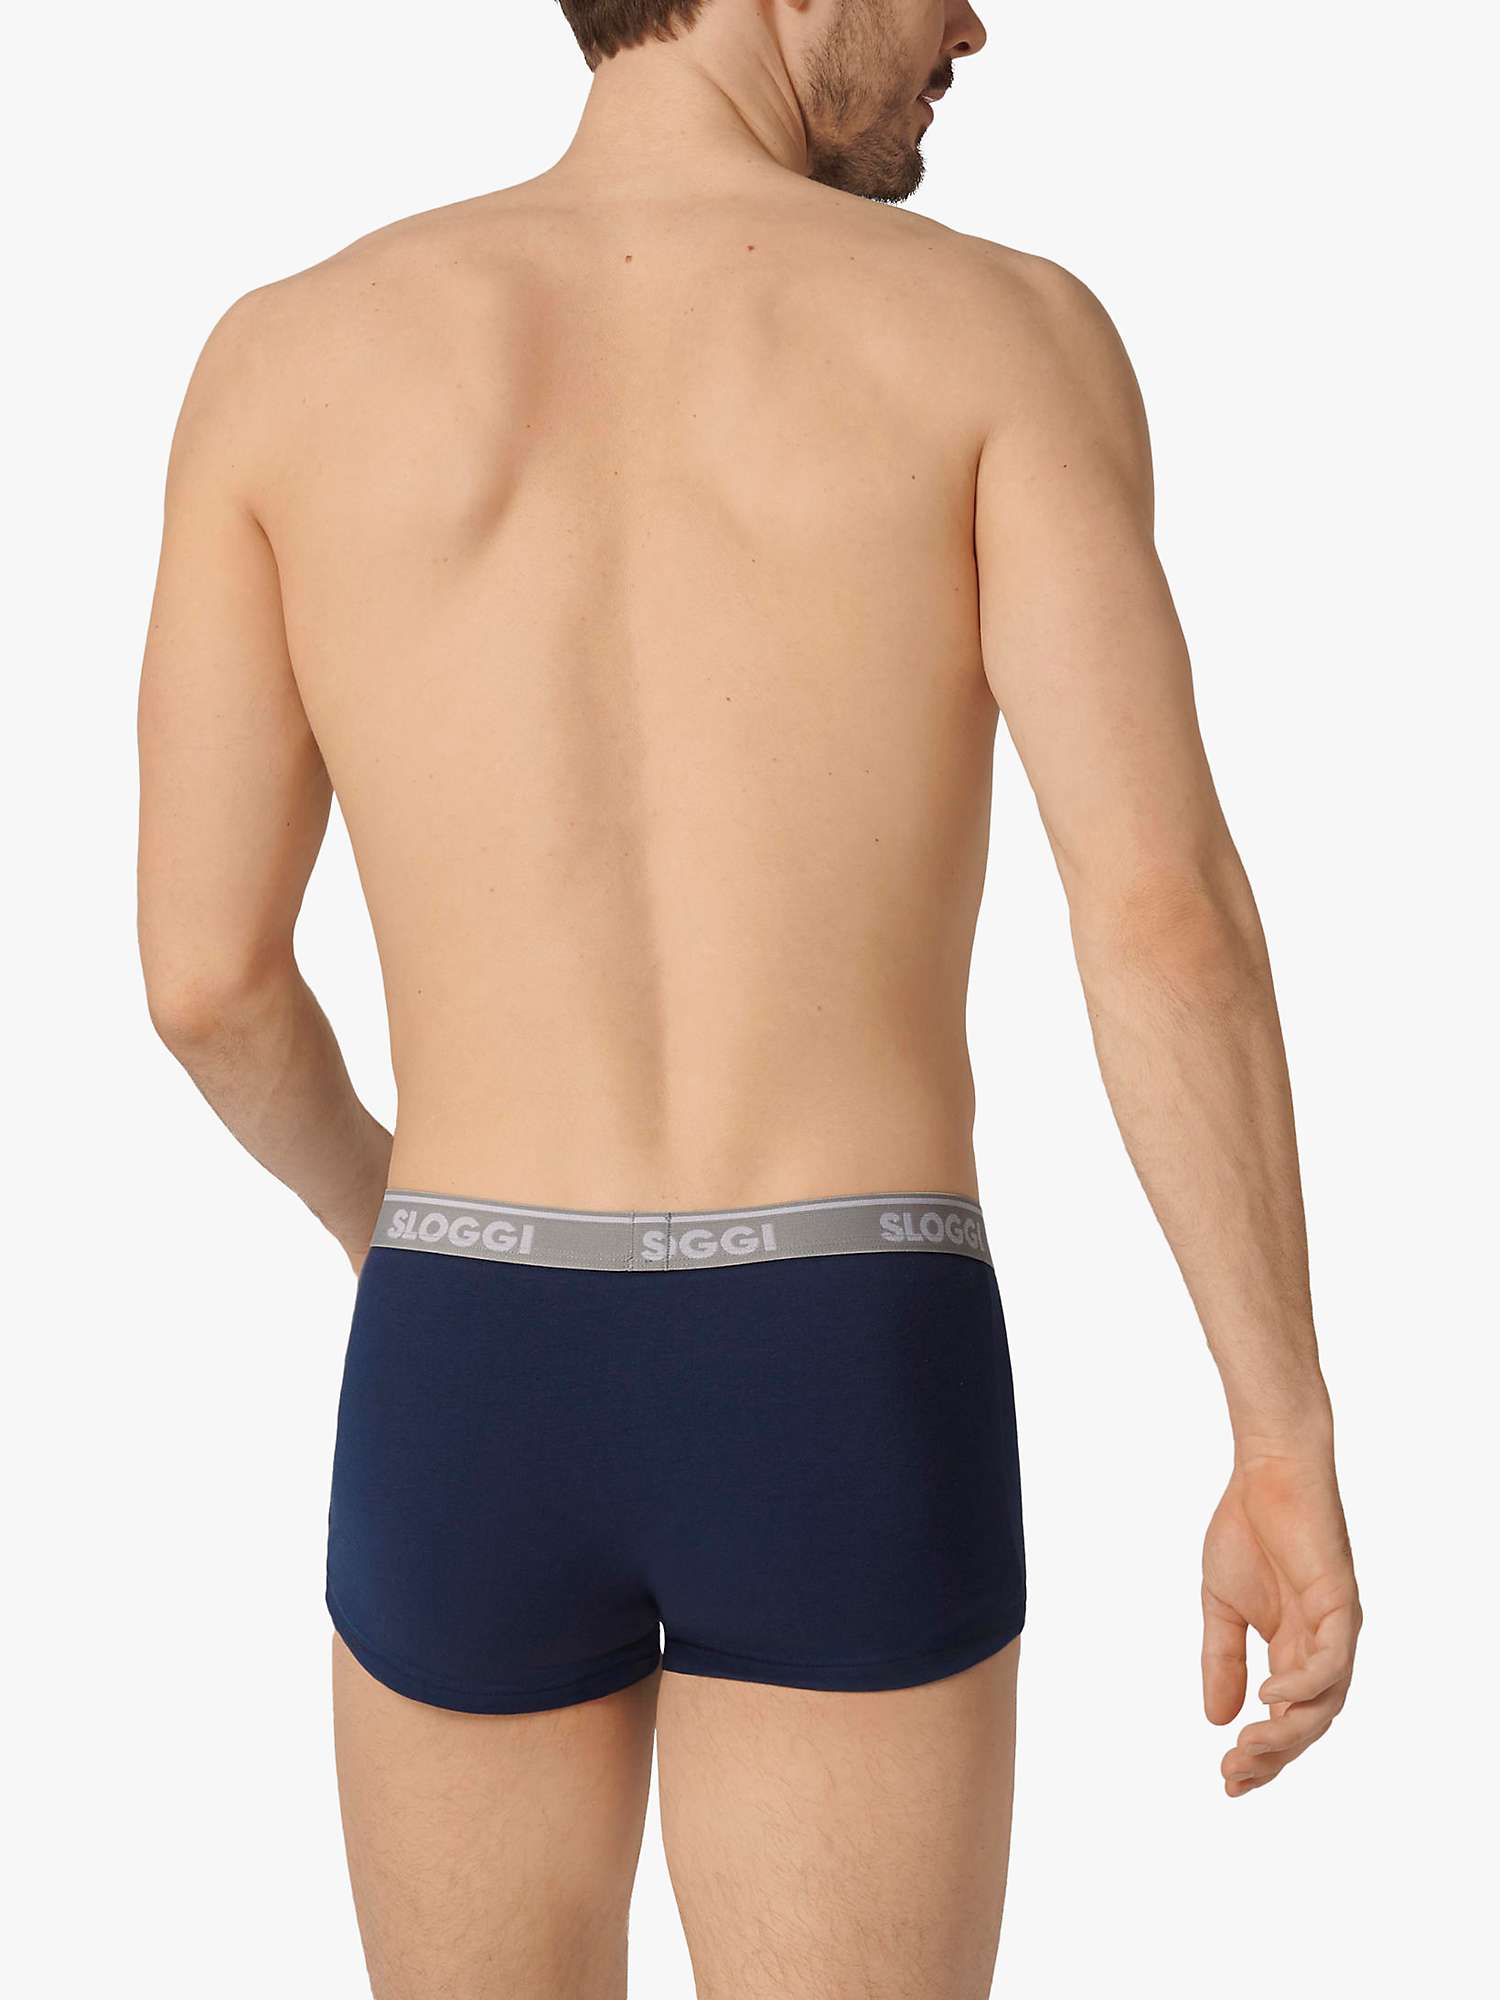 Buy sloggi GO ABC Cotton Stretch Hipster Trunks, Pack of 6, Grey Online at johnlewis.com